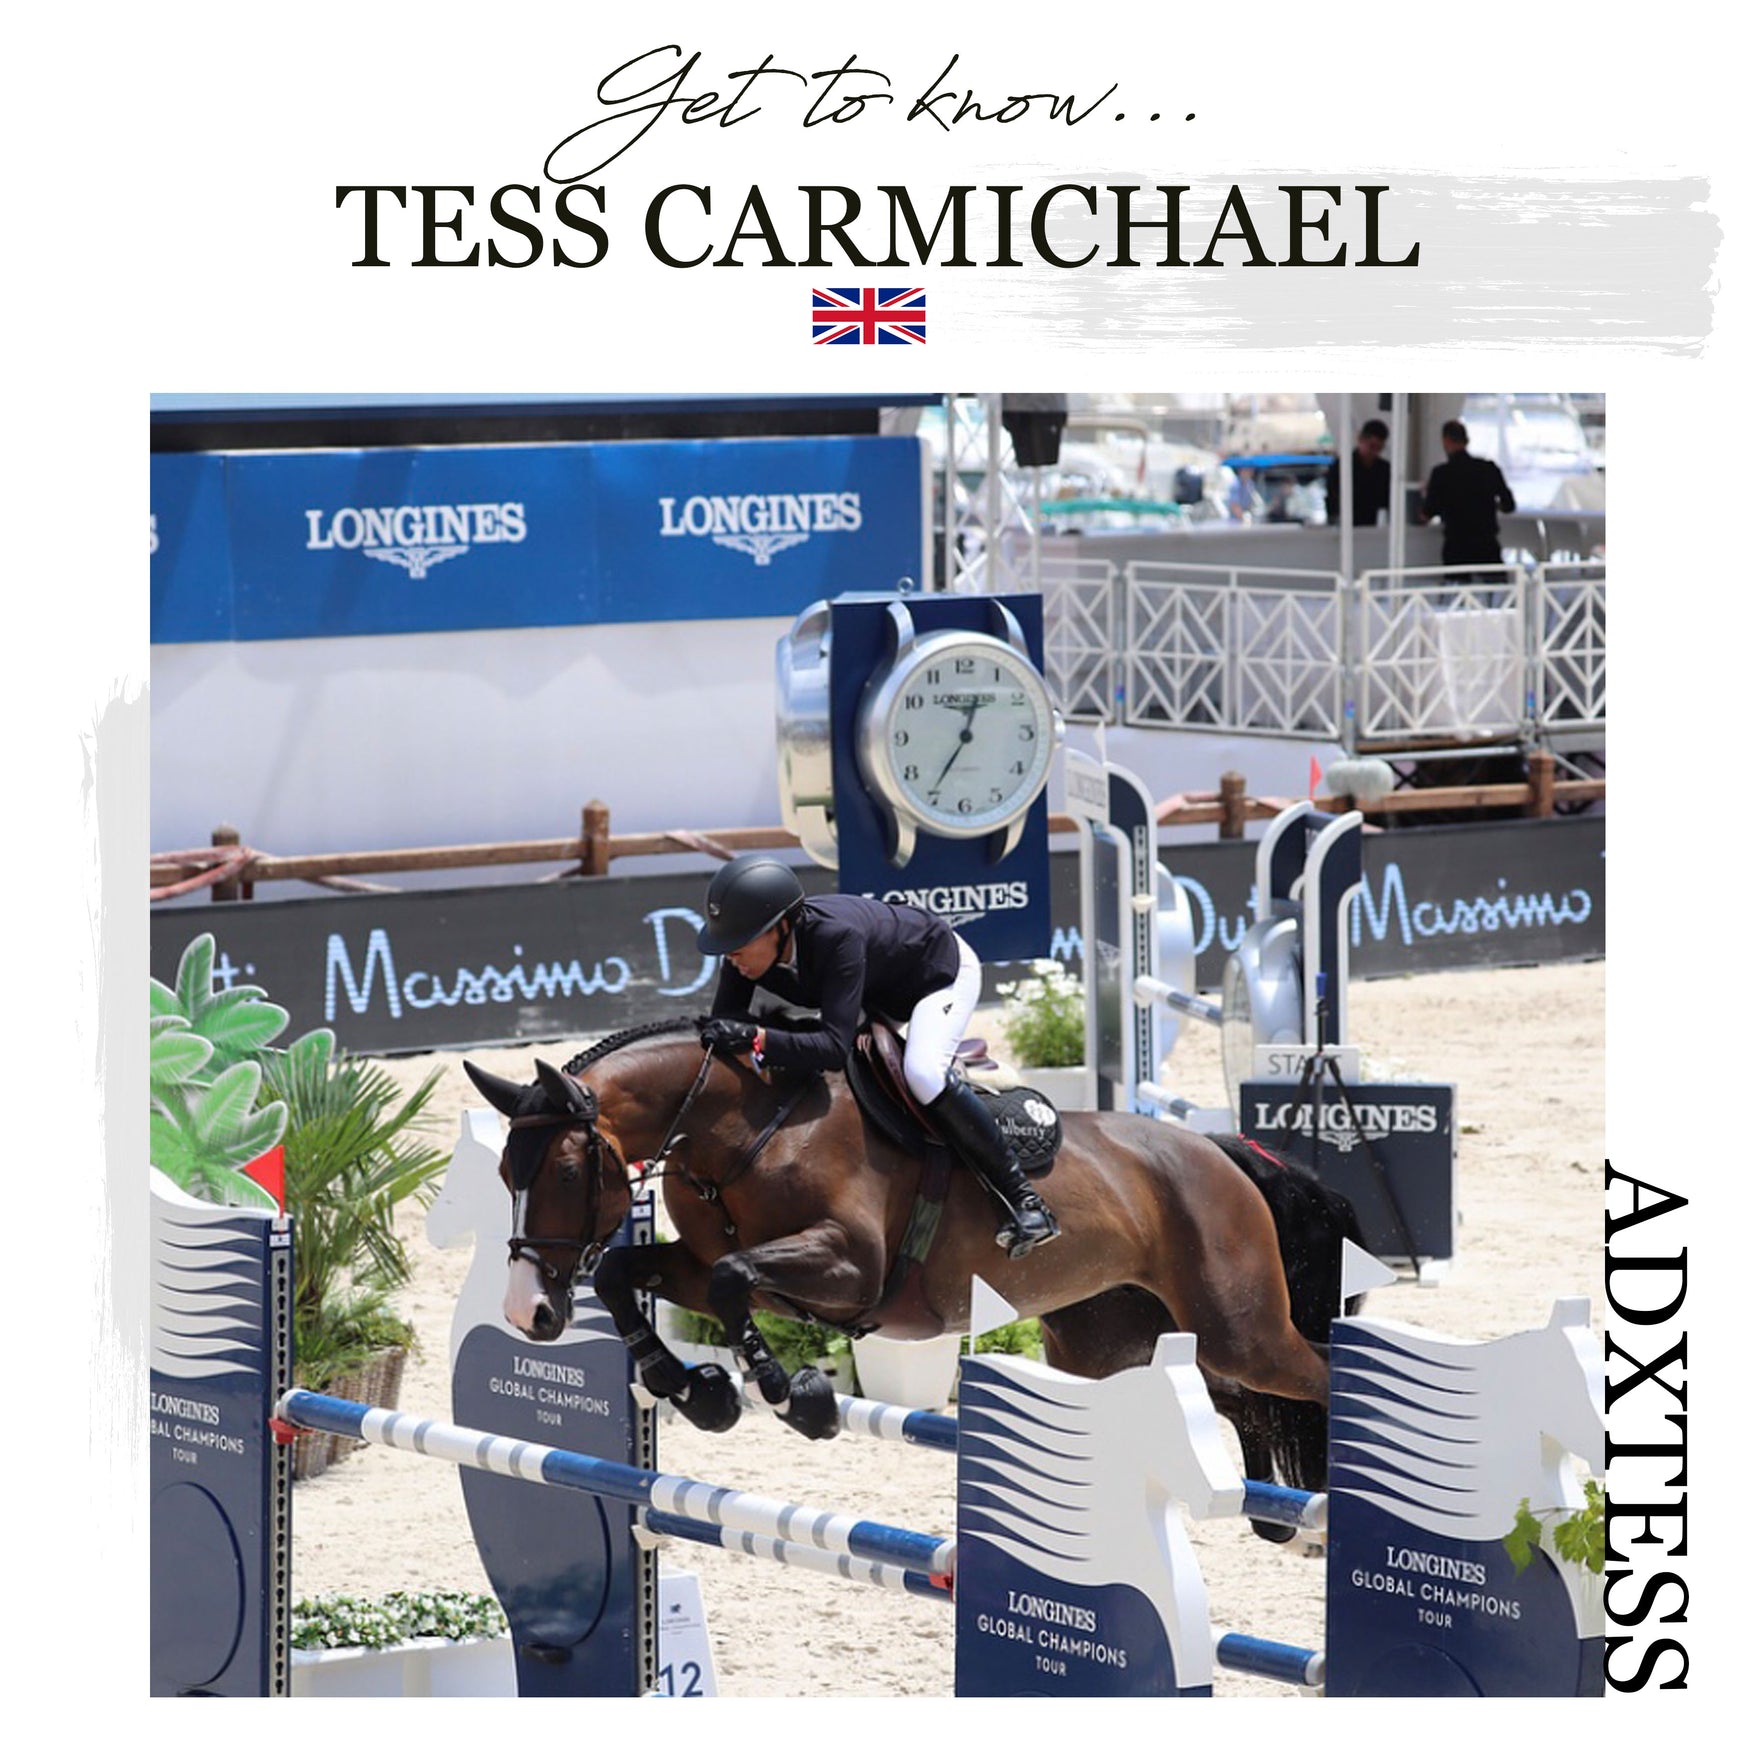 Get to know... Tess Carmichael